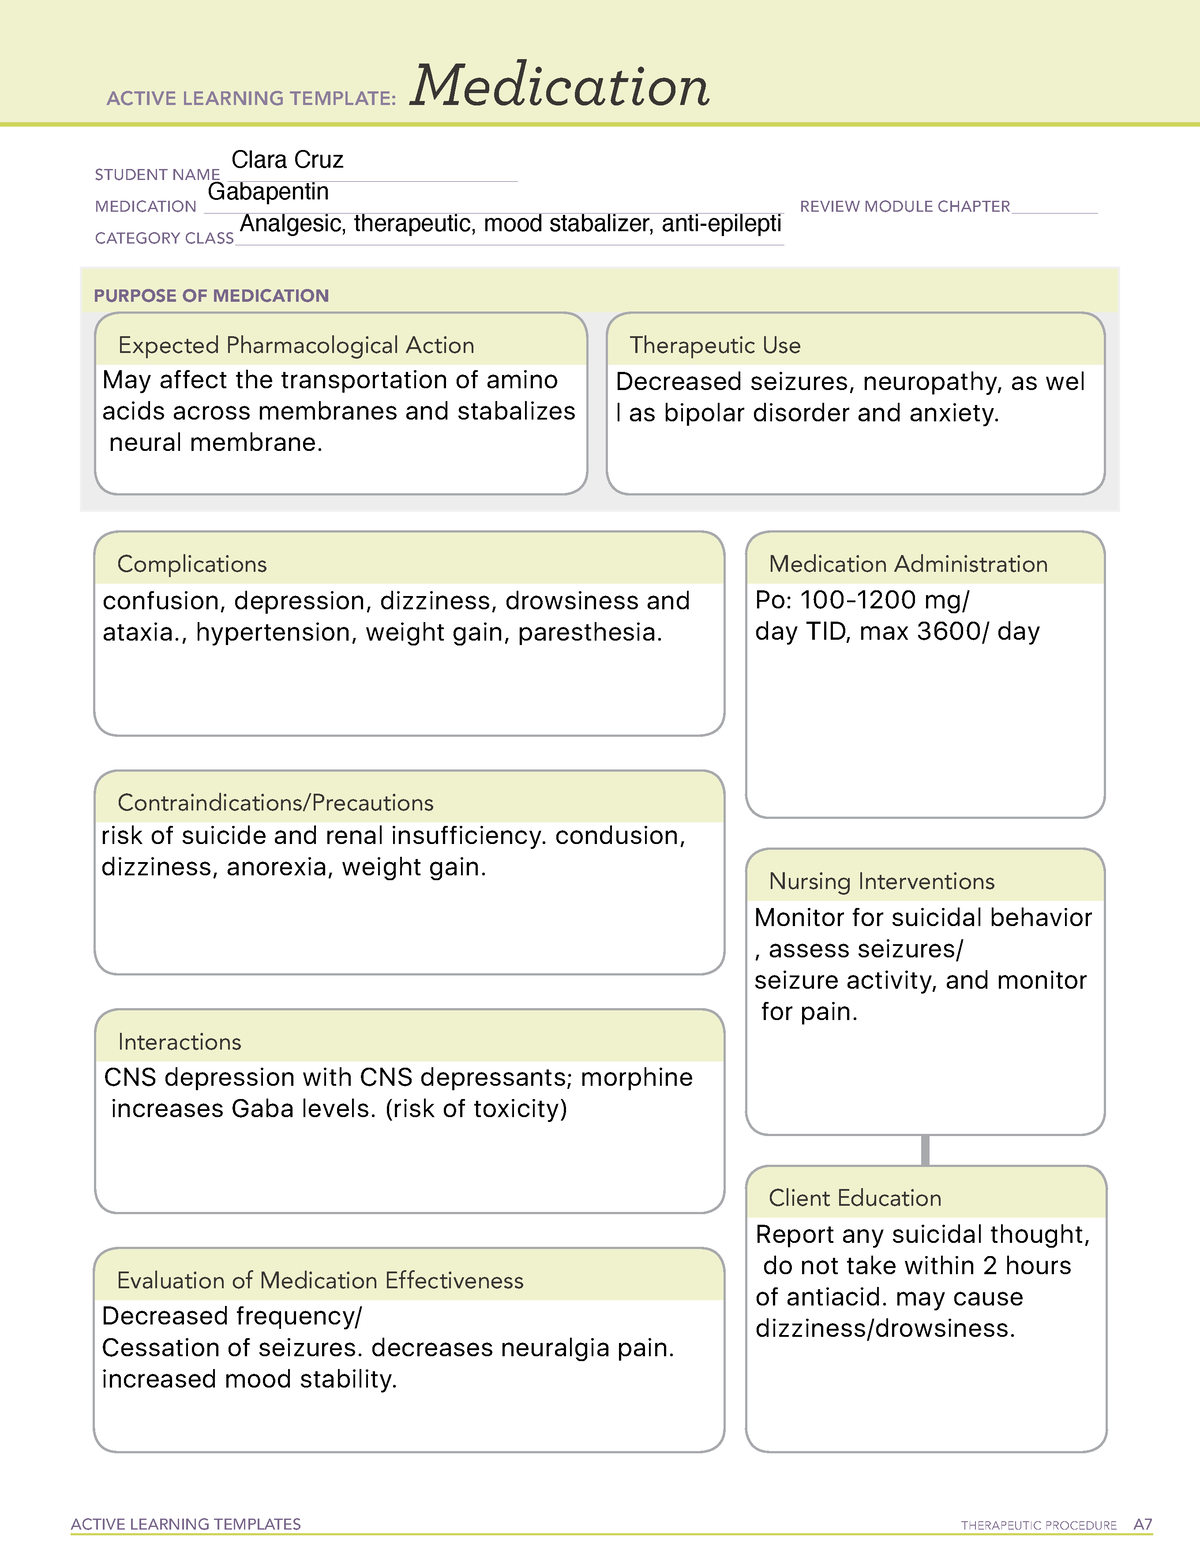 Medication Card Example Gabapentin Active Learning Te vrogue co